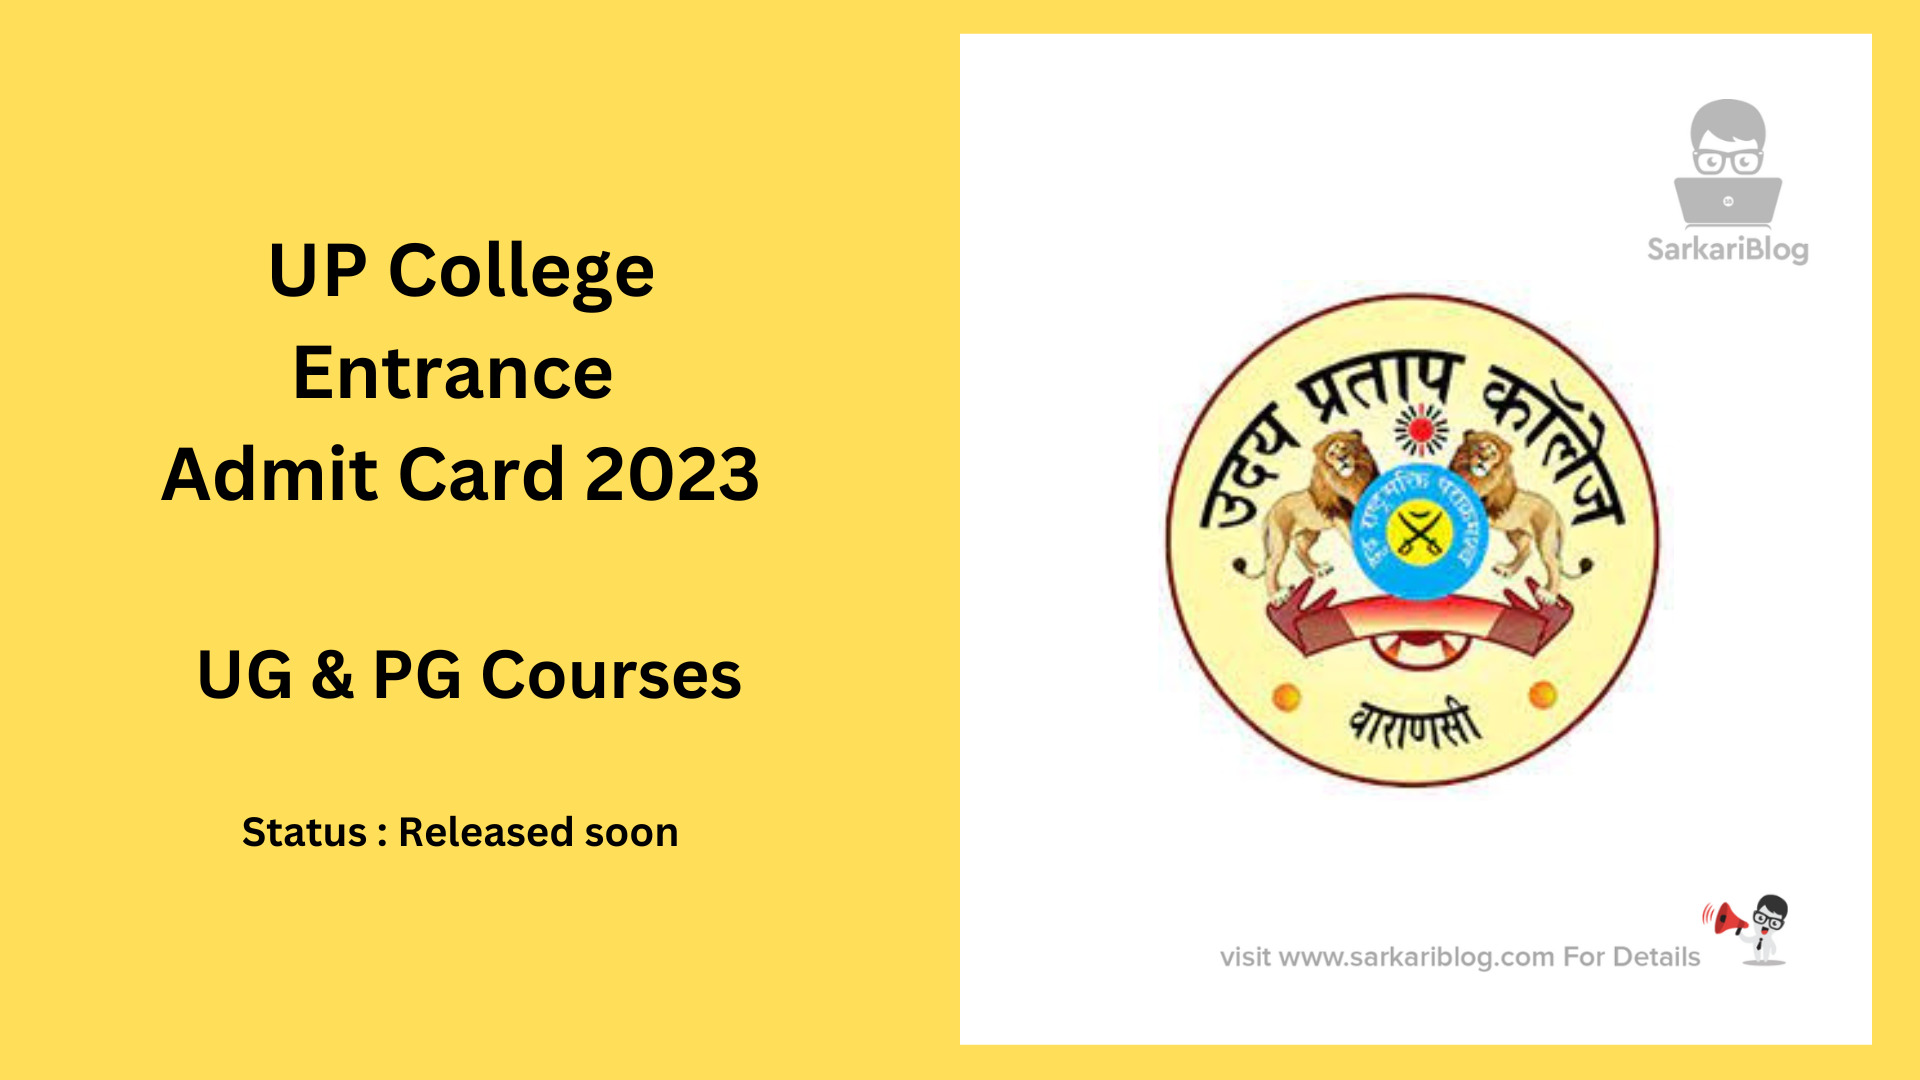 UP College Entrance Admit Card 2023